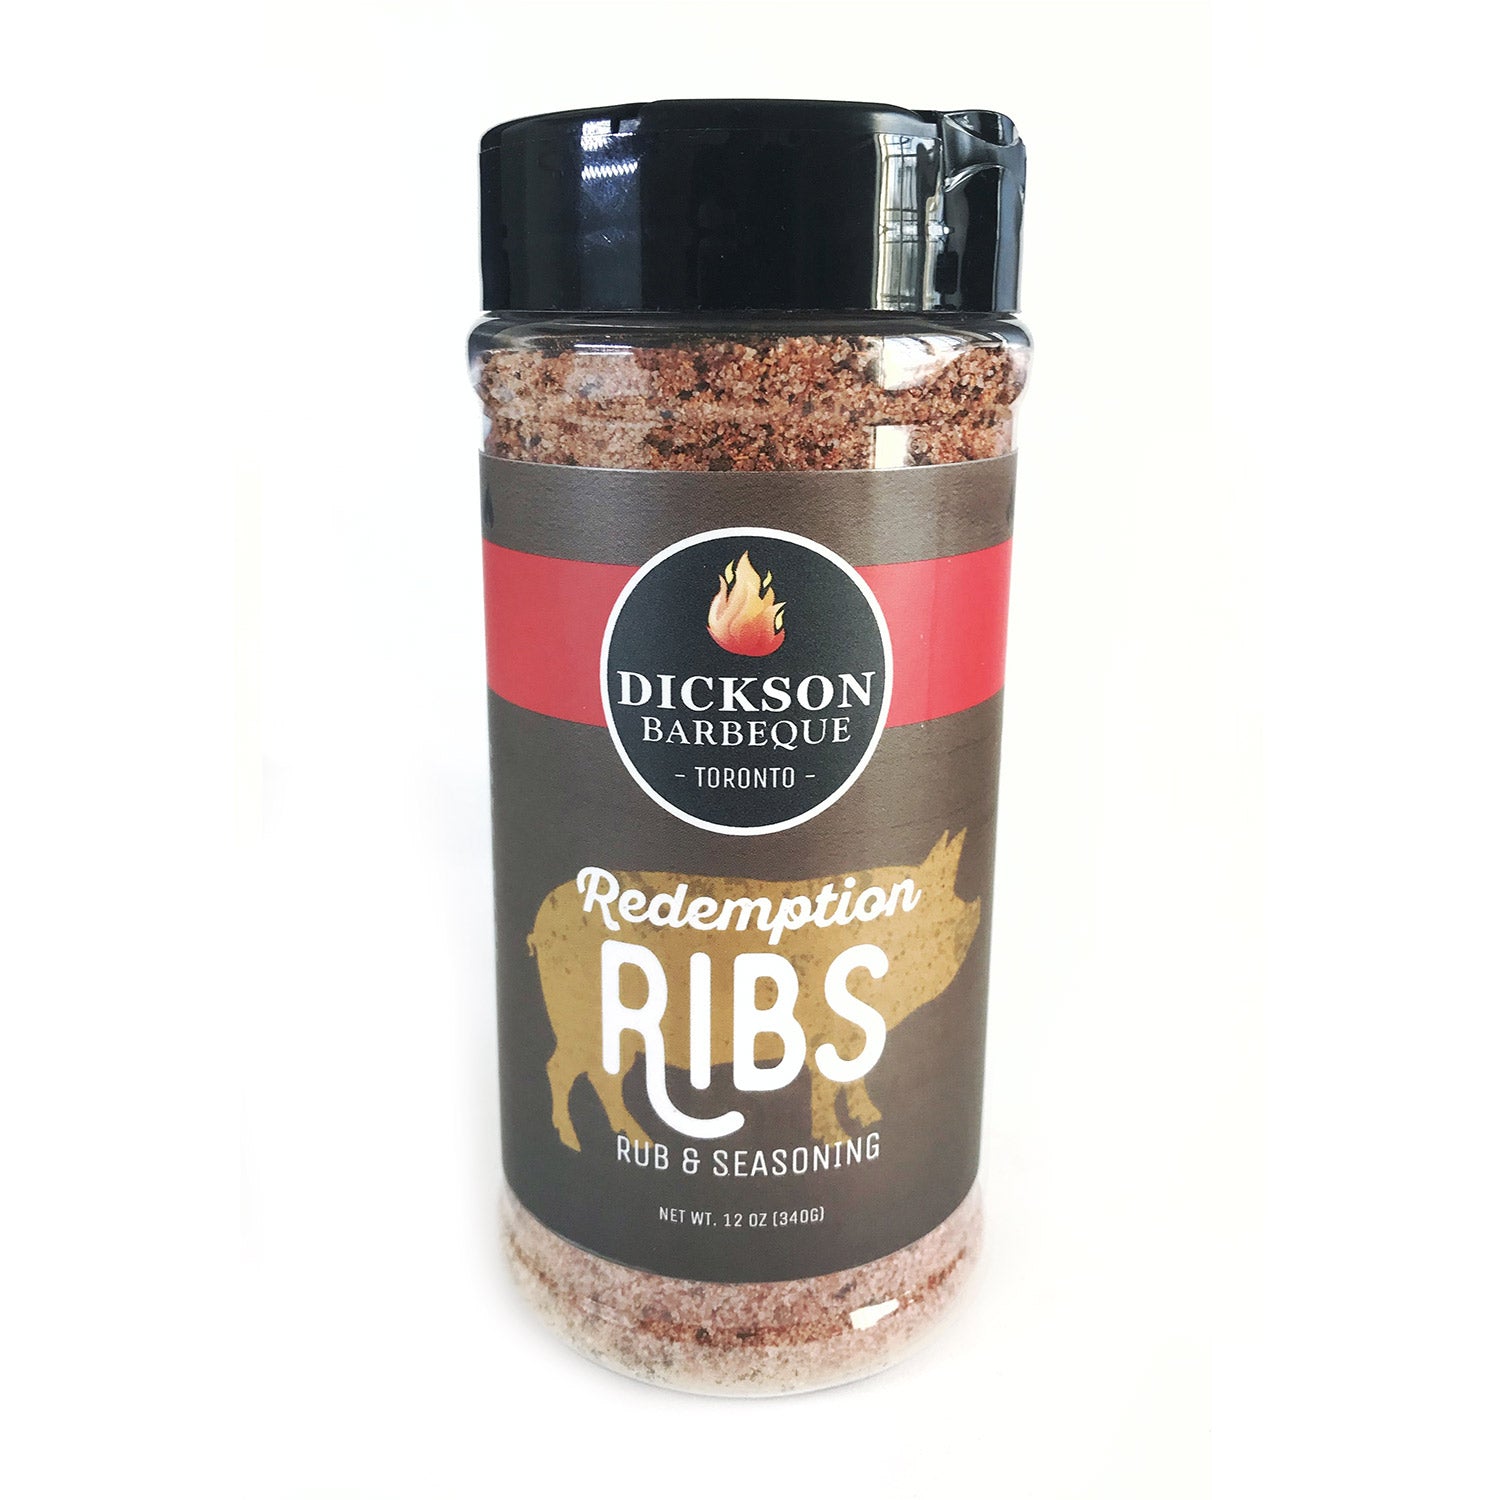 bottle of redemption ribs rub